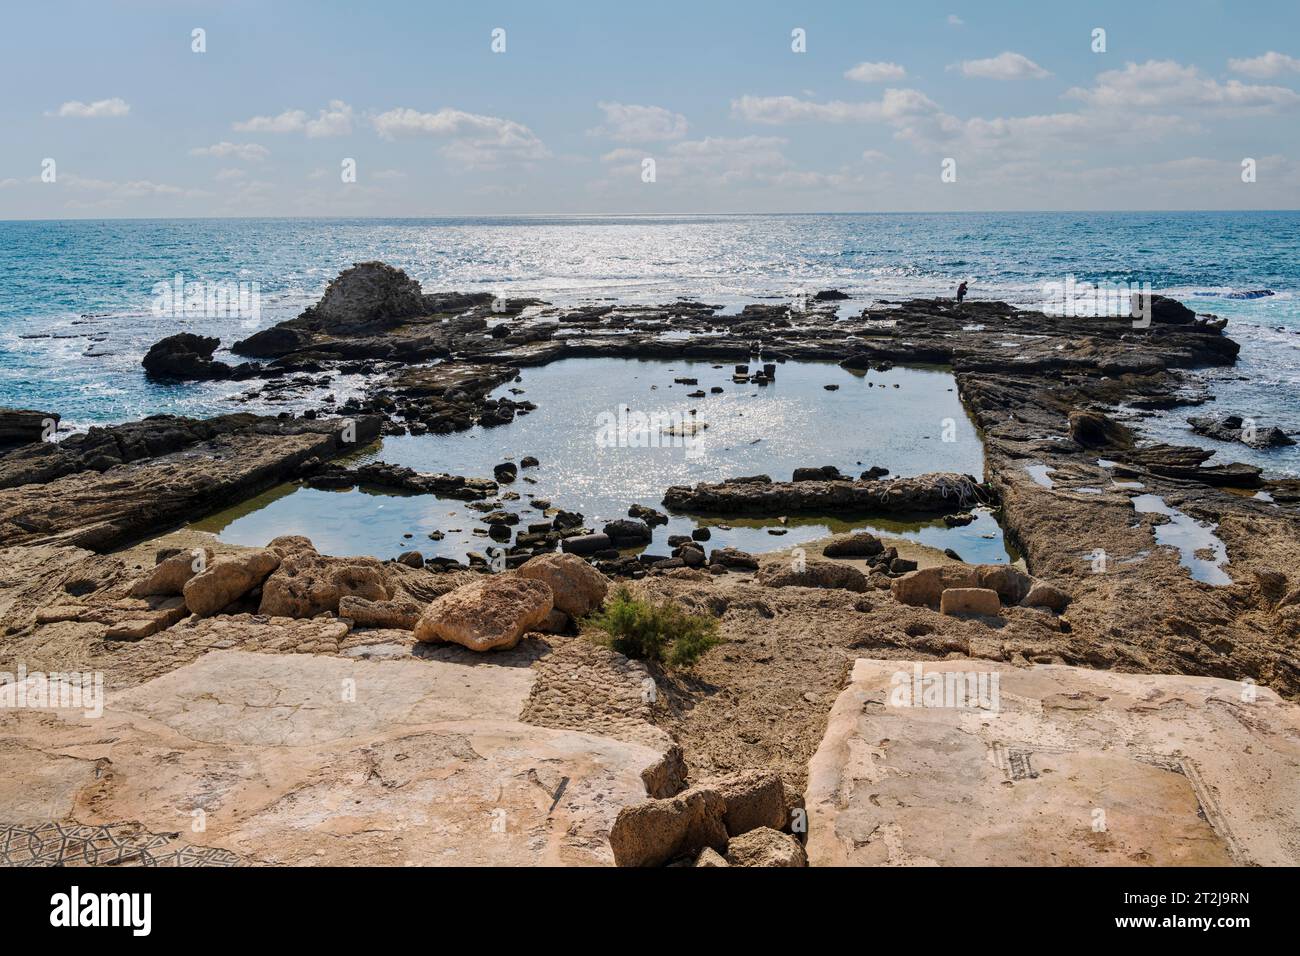 The ruins of Herod Palace in the Caesarea fortress built by Herod The Great near Caesarea city, on the shores of the Mediterranean Sea in northern Isr Stock Photo